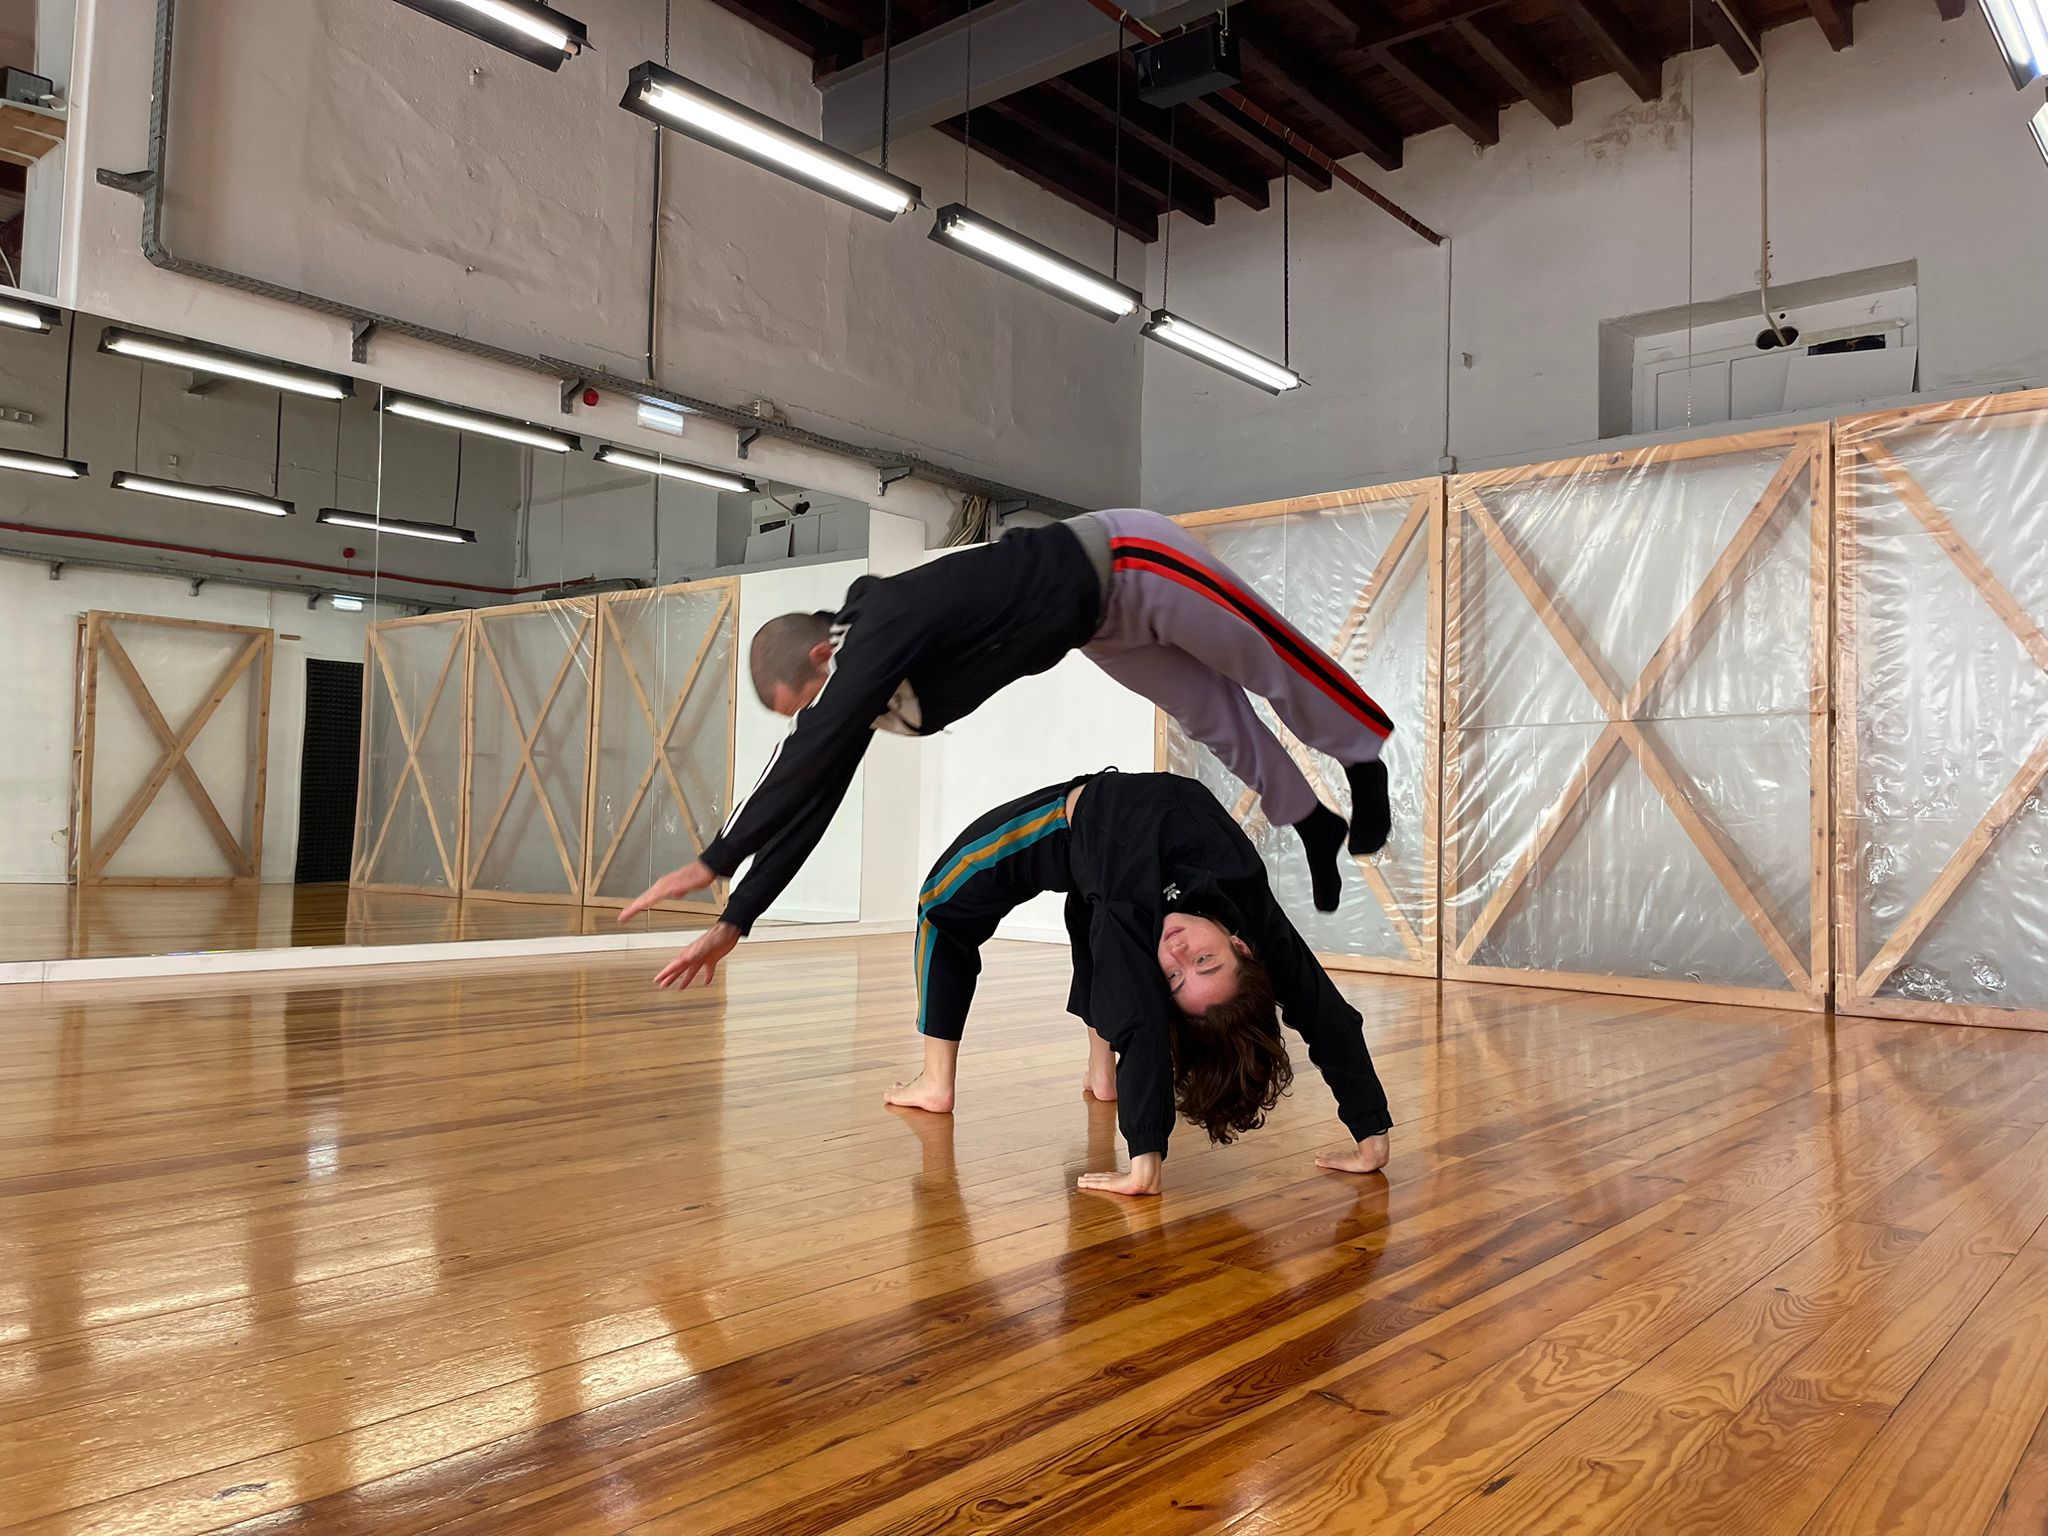 one dancer jumping over another dancer in a studio space